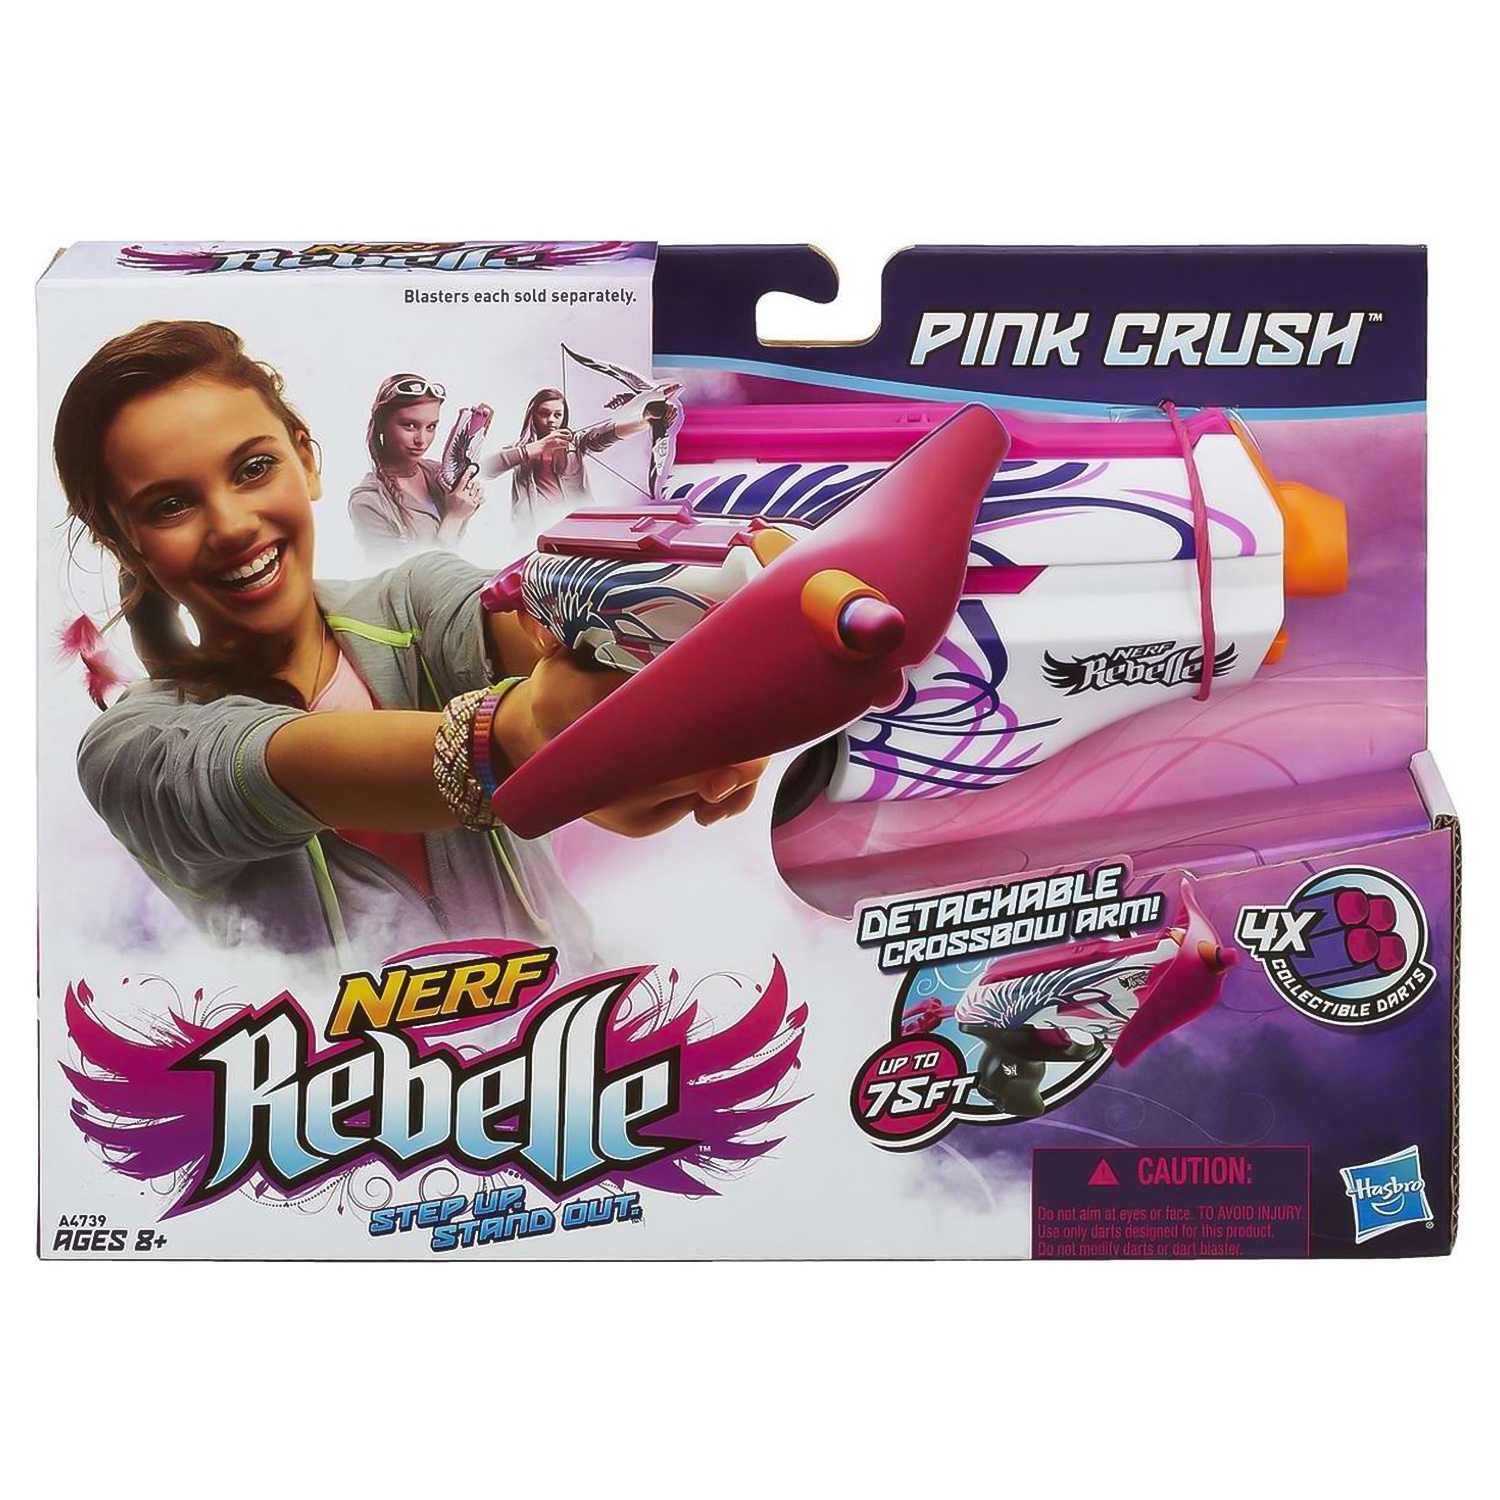 NERF Rebelle Pink Crush Blaster Crossbow Fires Darts up to 75 Feet 2in1 for sale online 